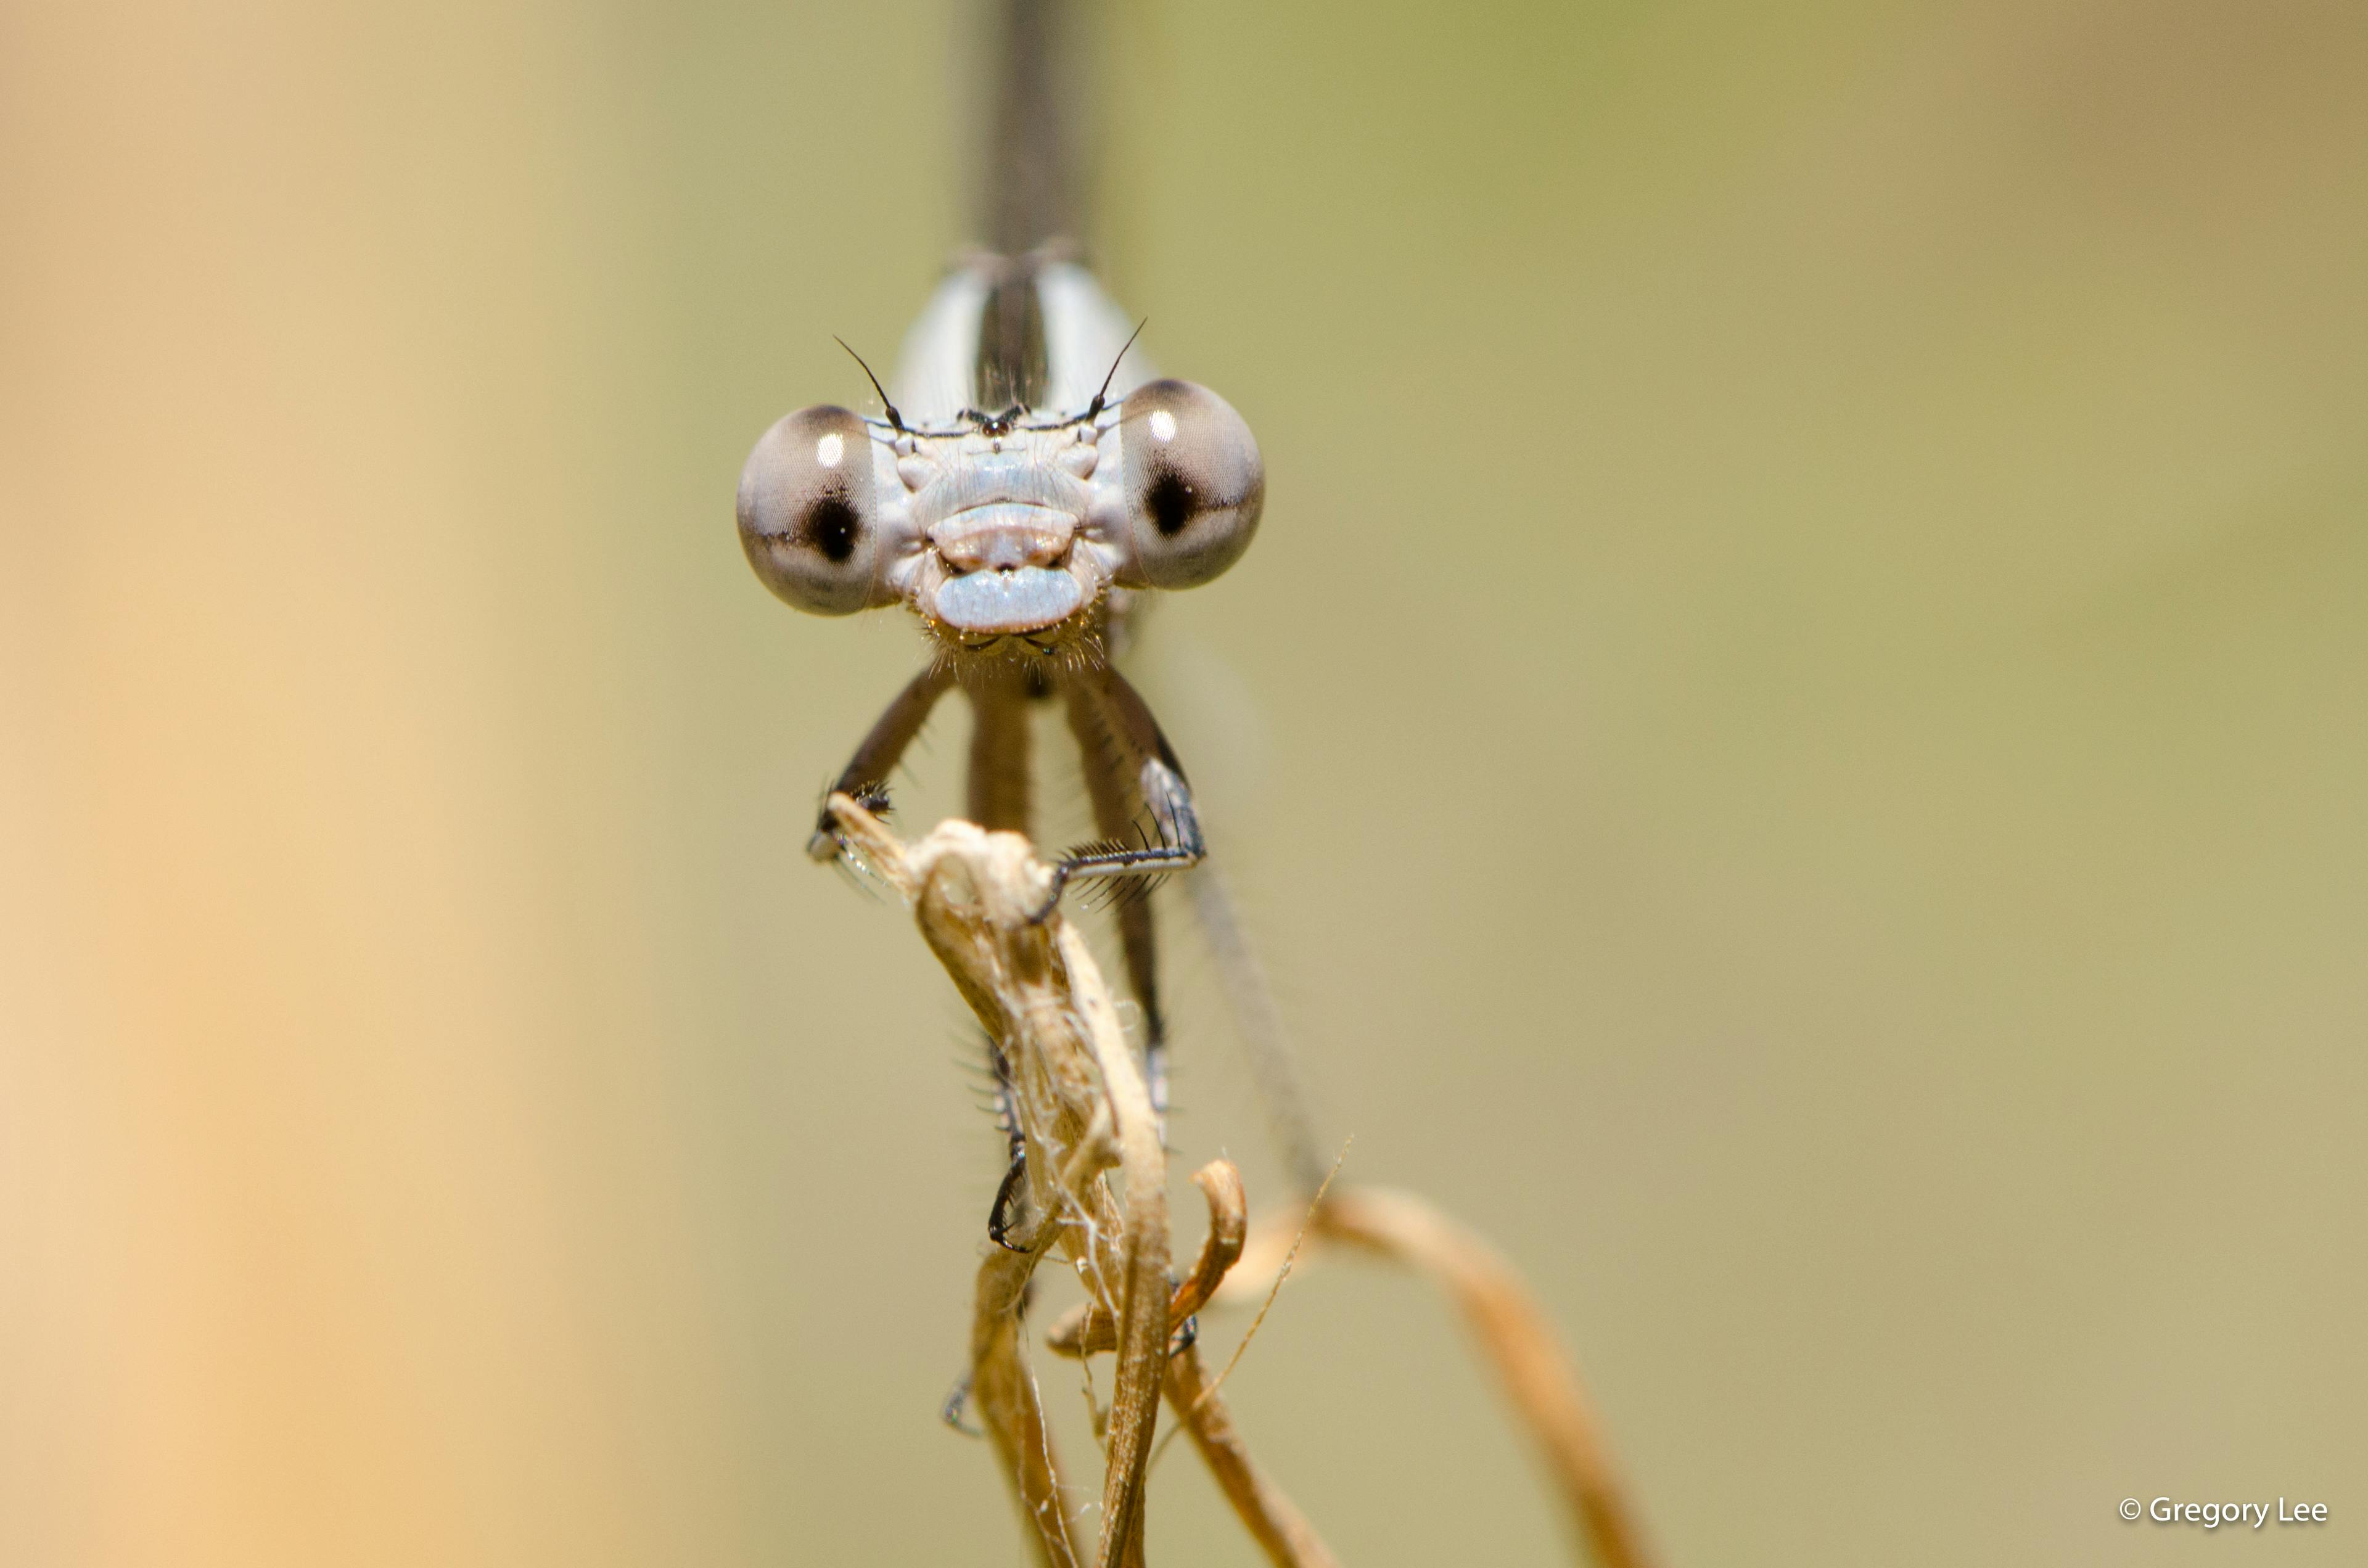 The Eyes of a Dragonfly